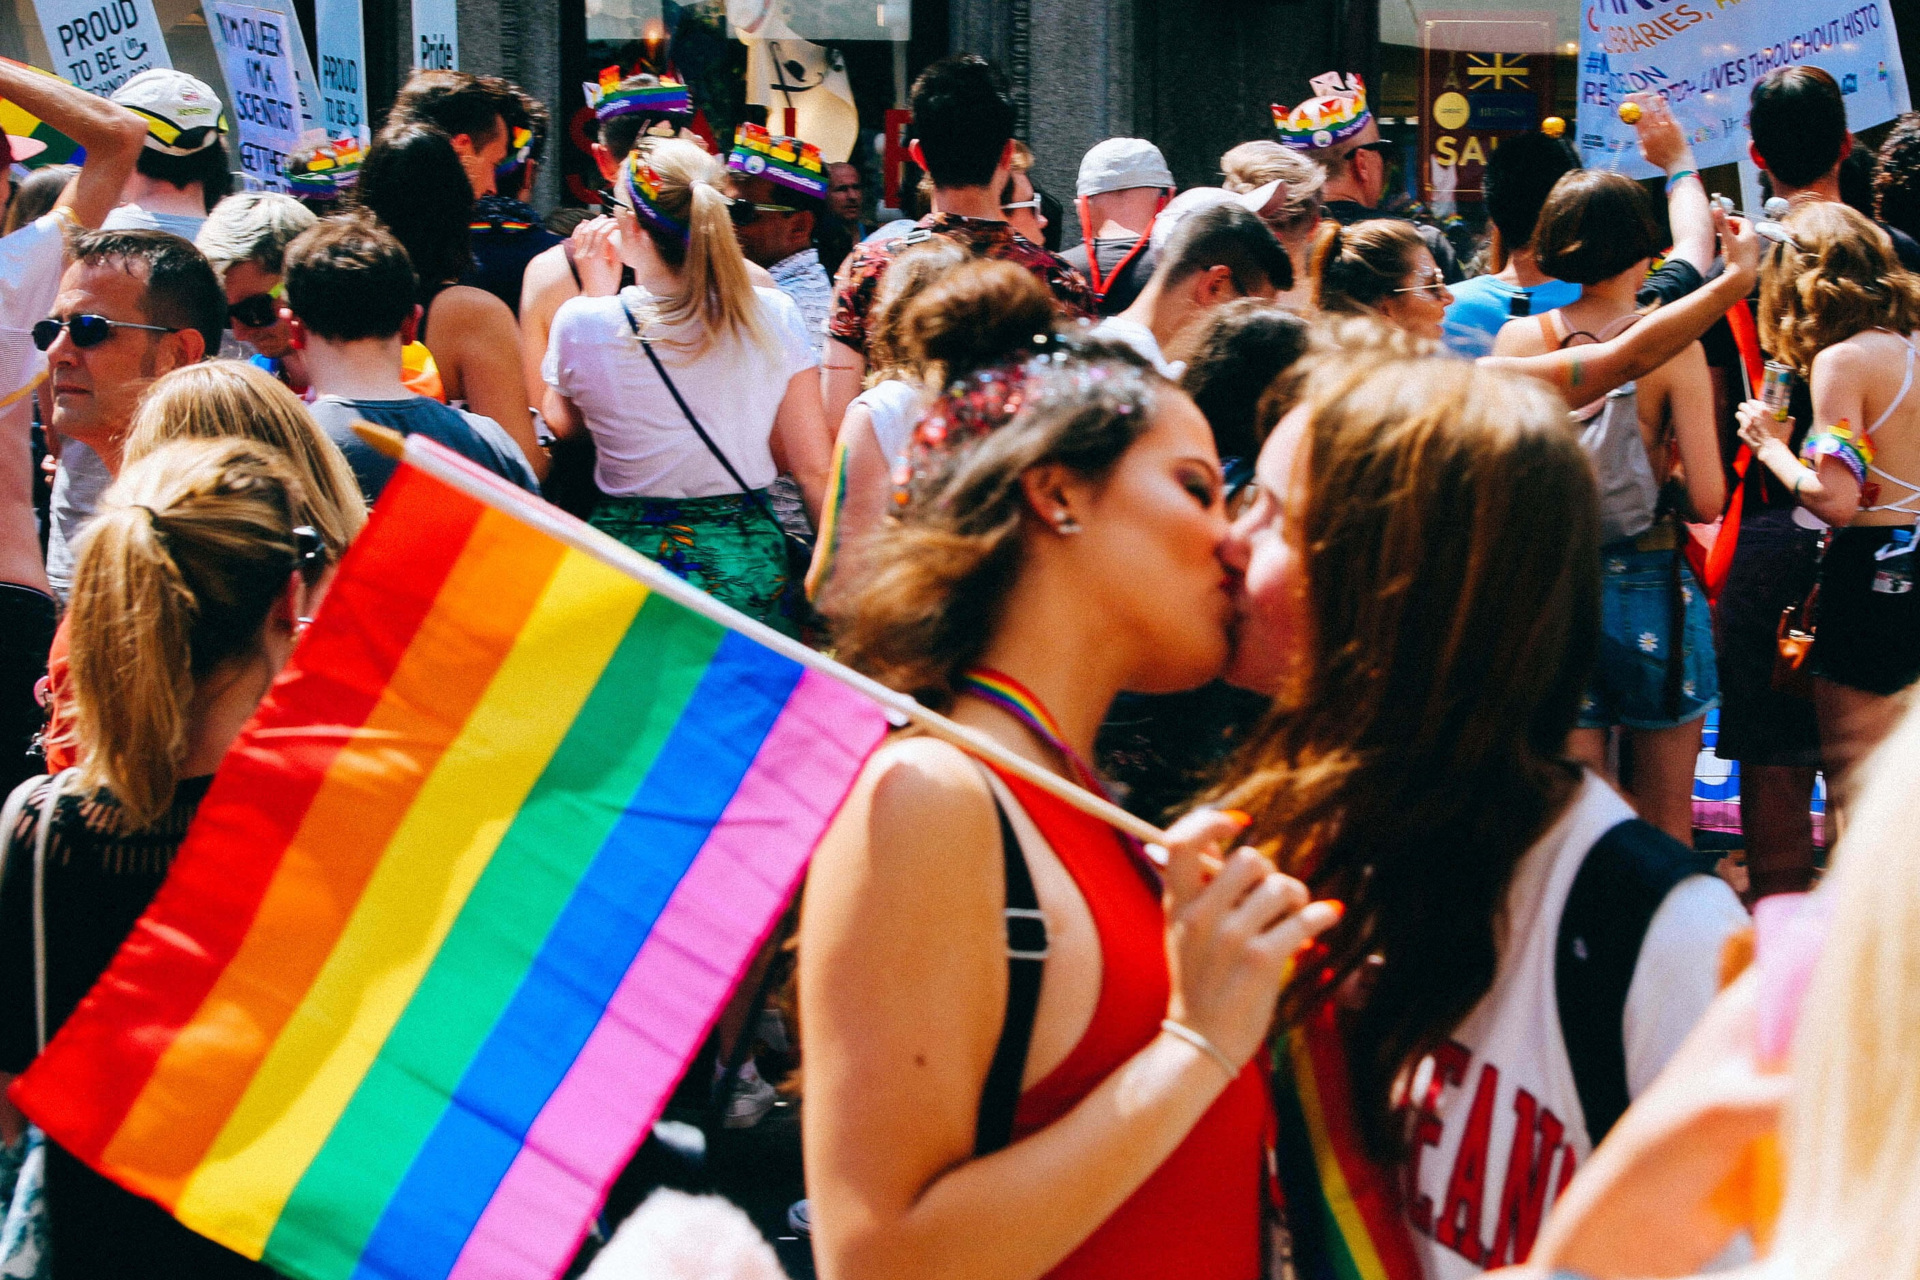 Two women kissing holding a pride flag amongst a crowd of people